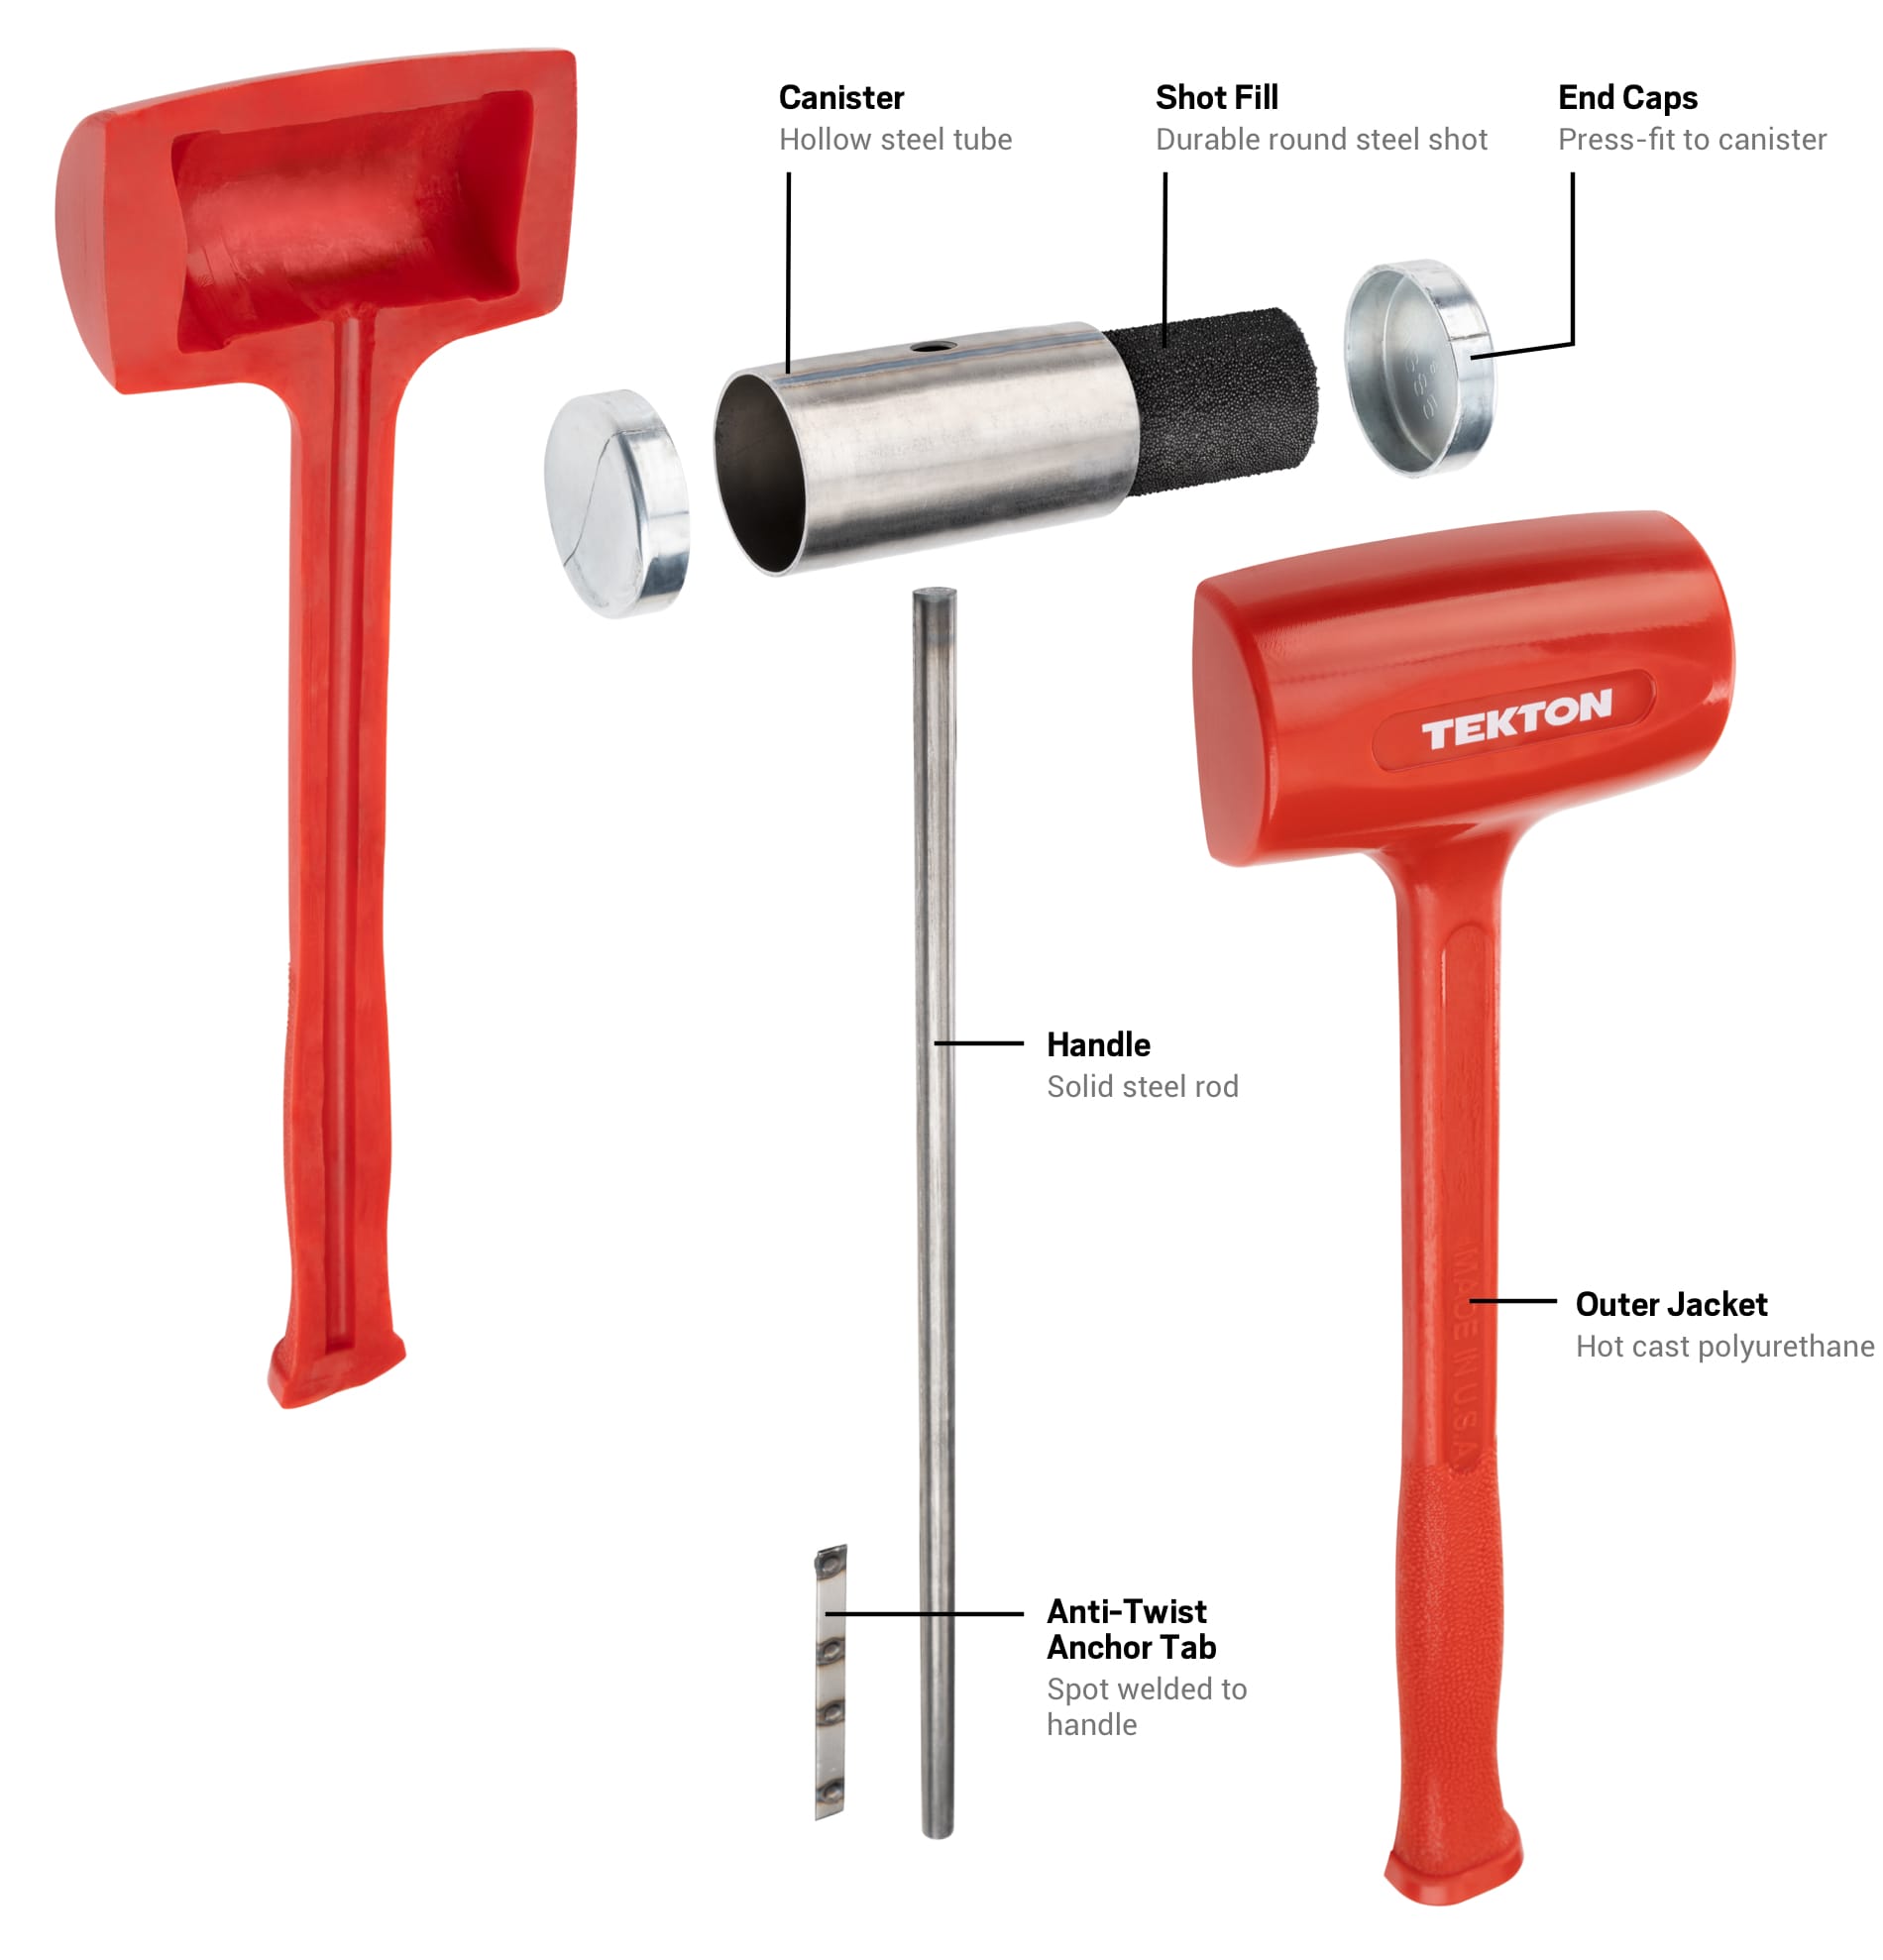 TEKTON Dead Blow Hammer parts and assembly